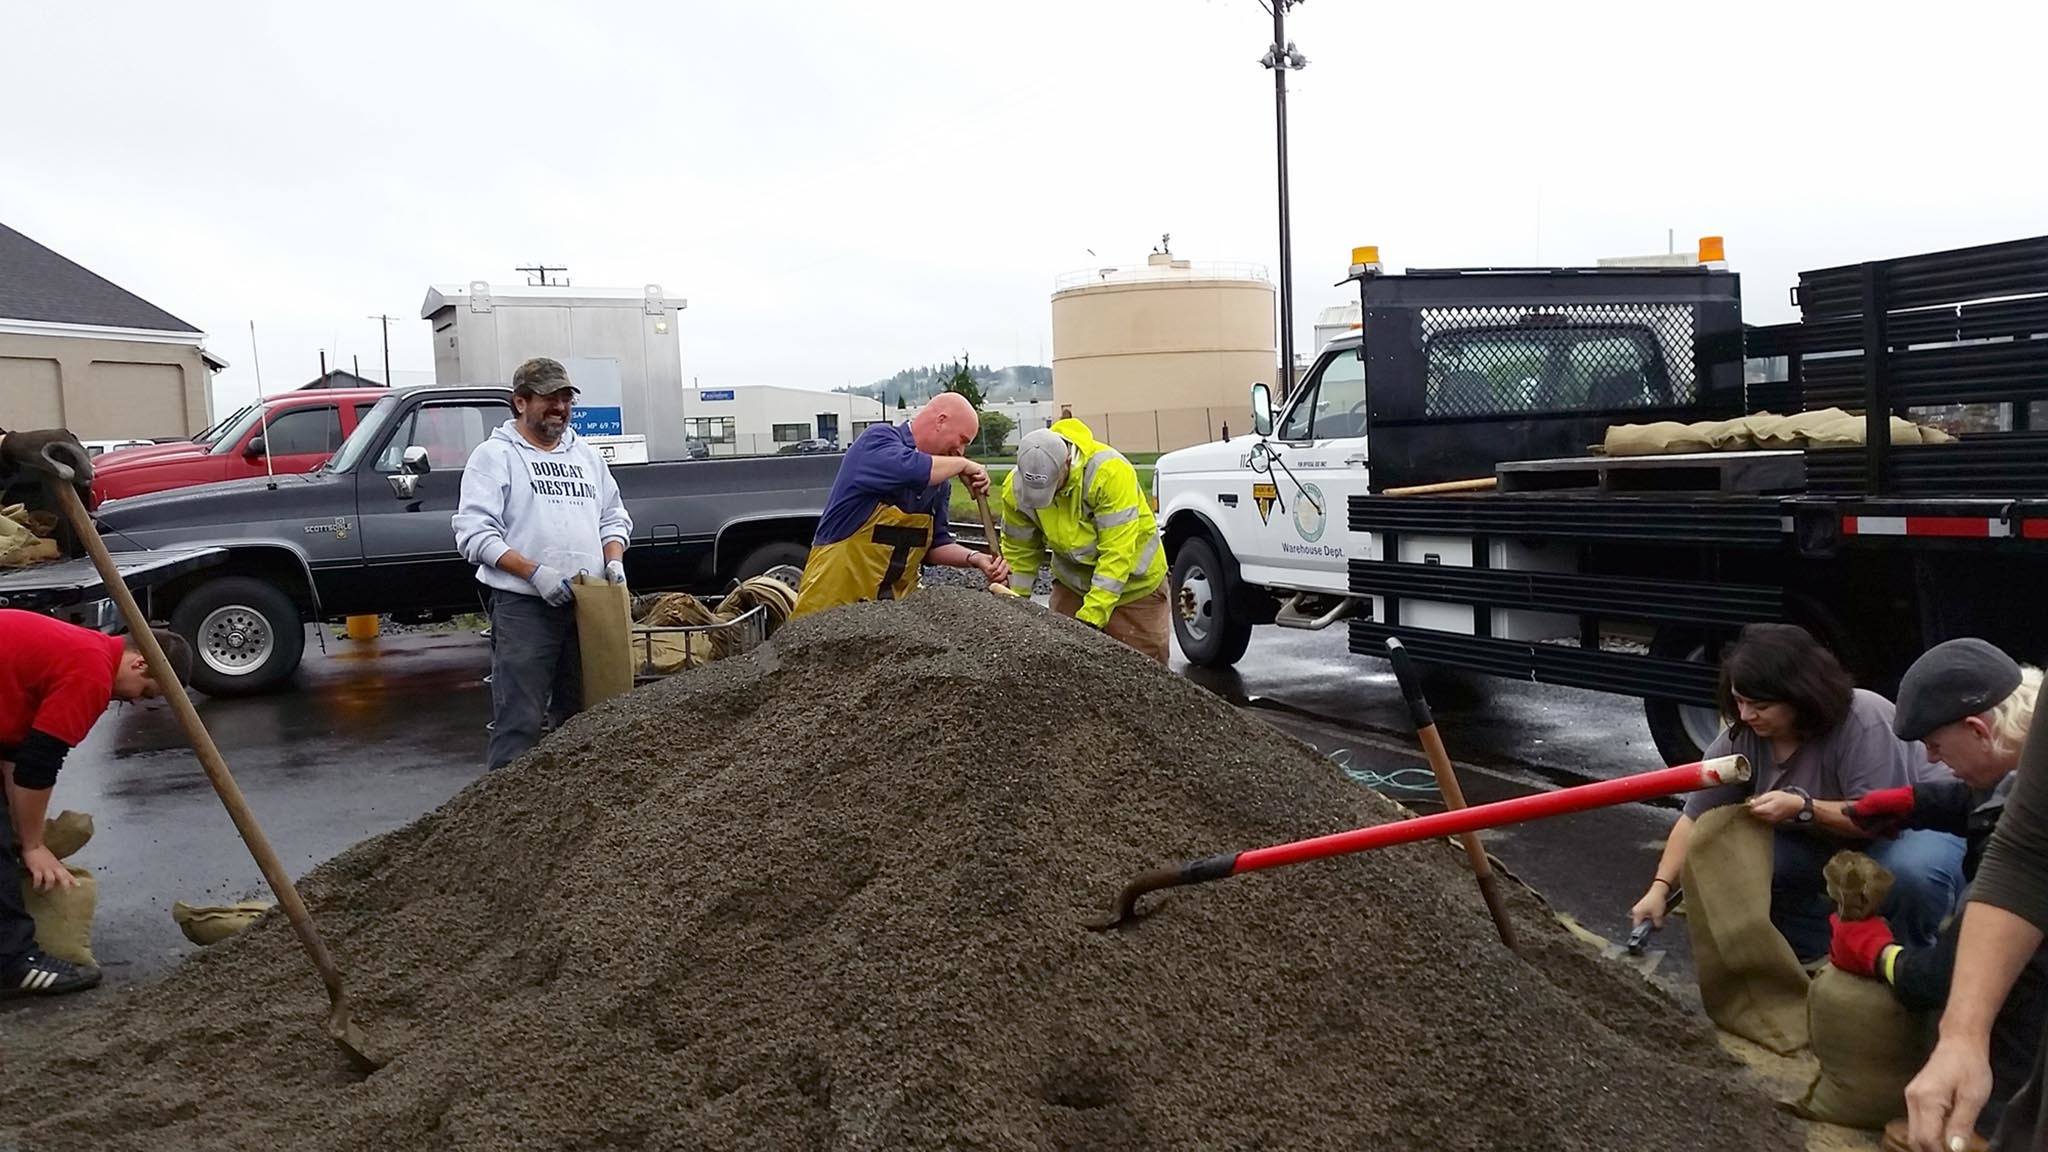 Sal Prieto of Aberdeen, left, holding a sandbag, was among residents and Grays Harbor PUD employees outside of the Aberdeen Water Department filling sandbags Thursday morning in preparation for strong storm conditions through the weekend. (Terri Harber|The Daily World)